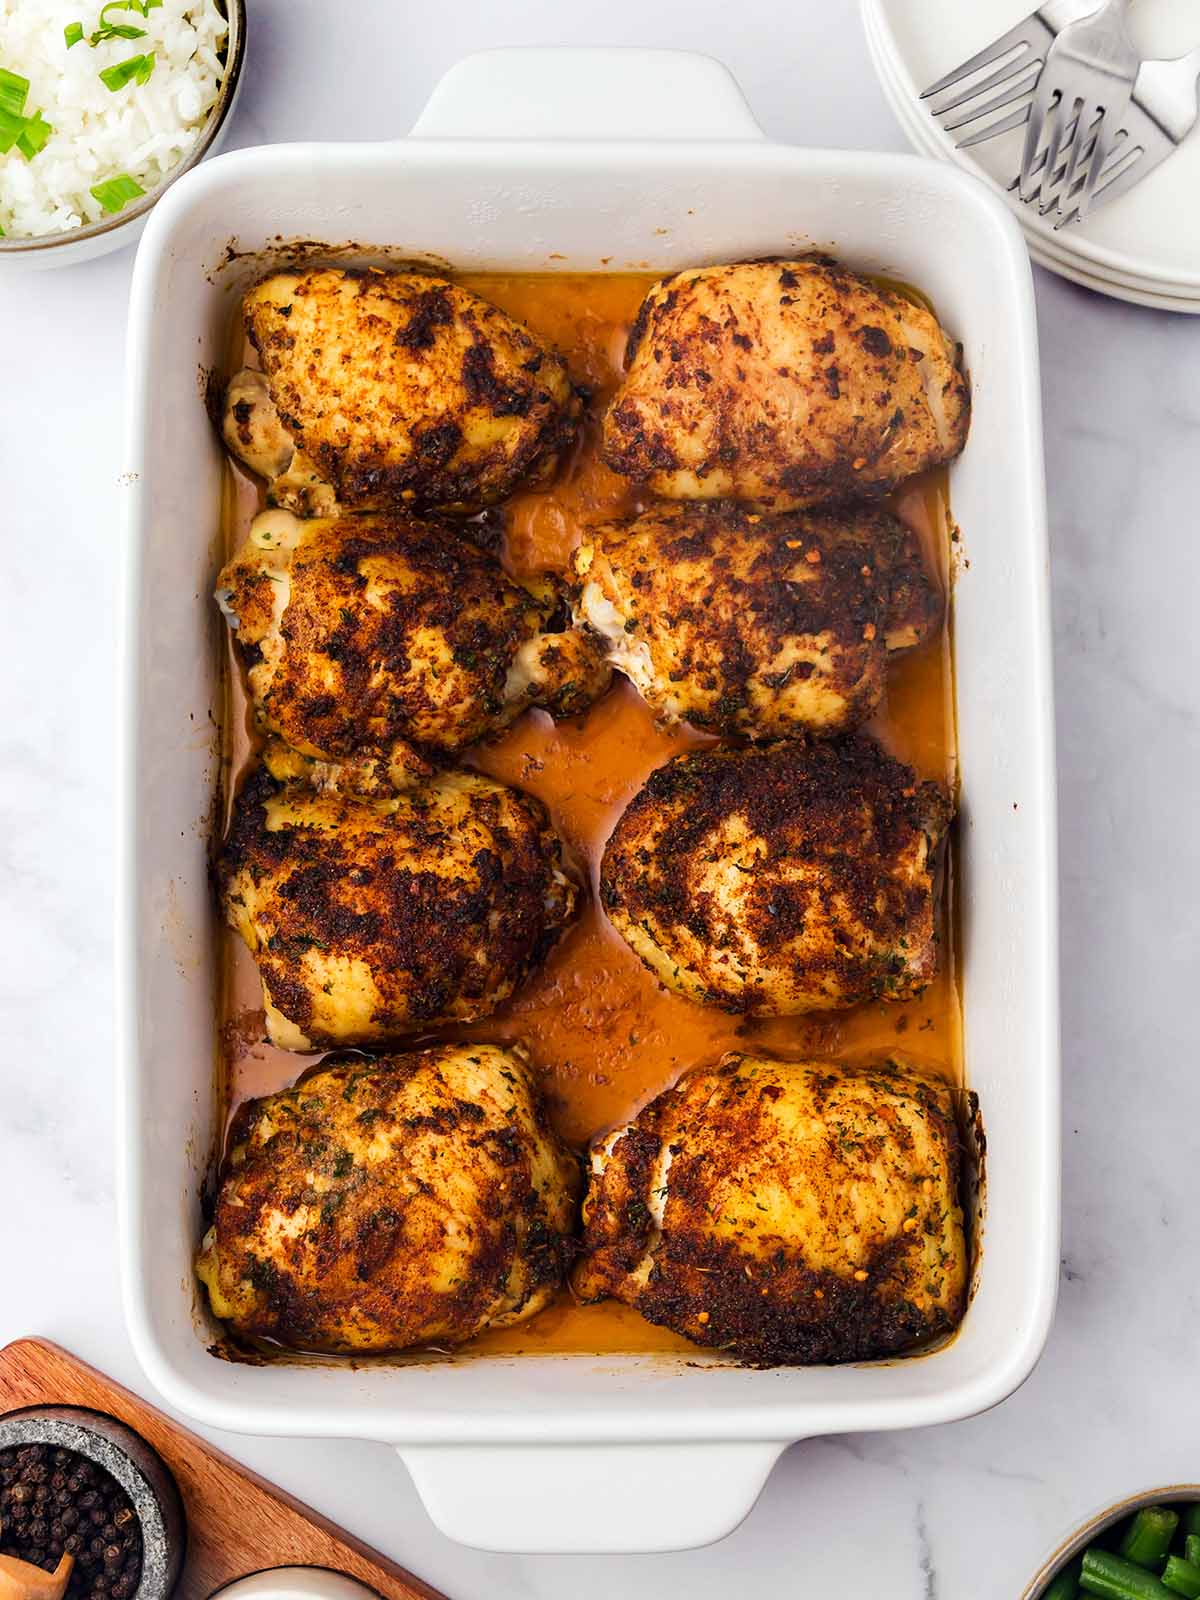 Pollo Al Horno in a baking dish with plates on the side.